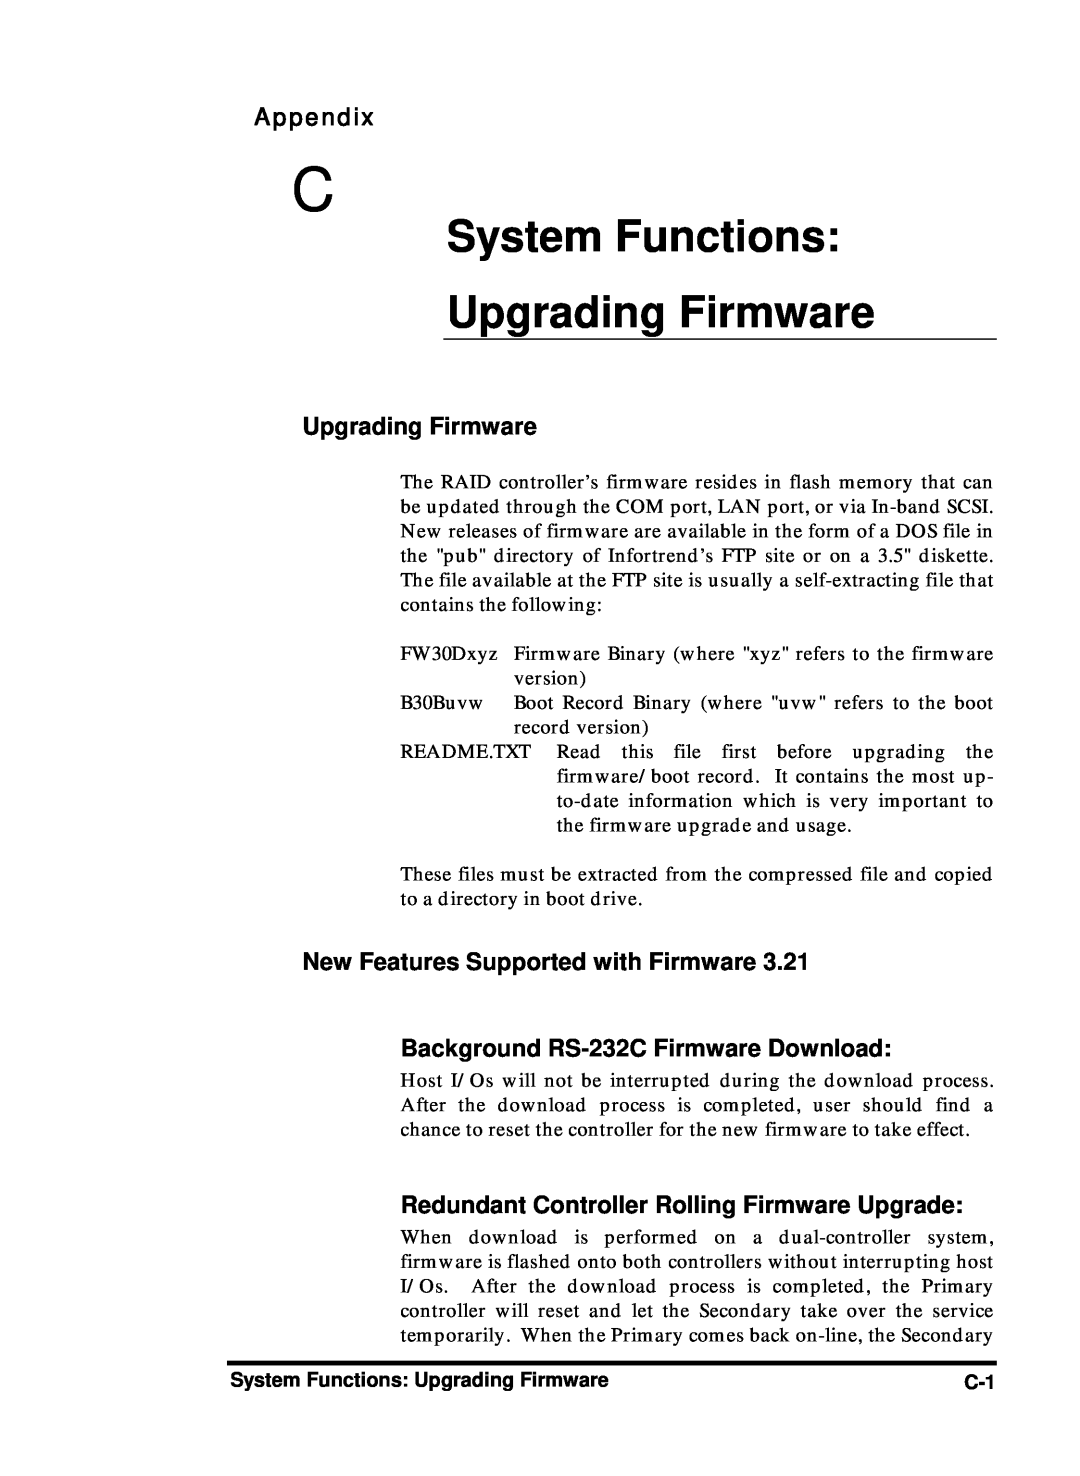 Compaq Infortrend manual System Functions Upgrading Firmware, New Features Supported with Firmware, Appendix 